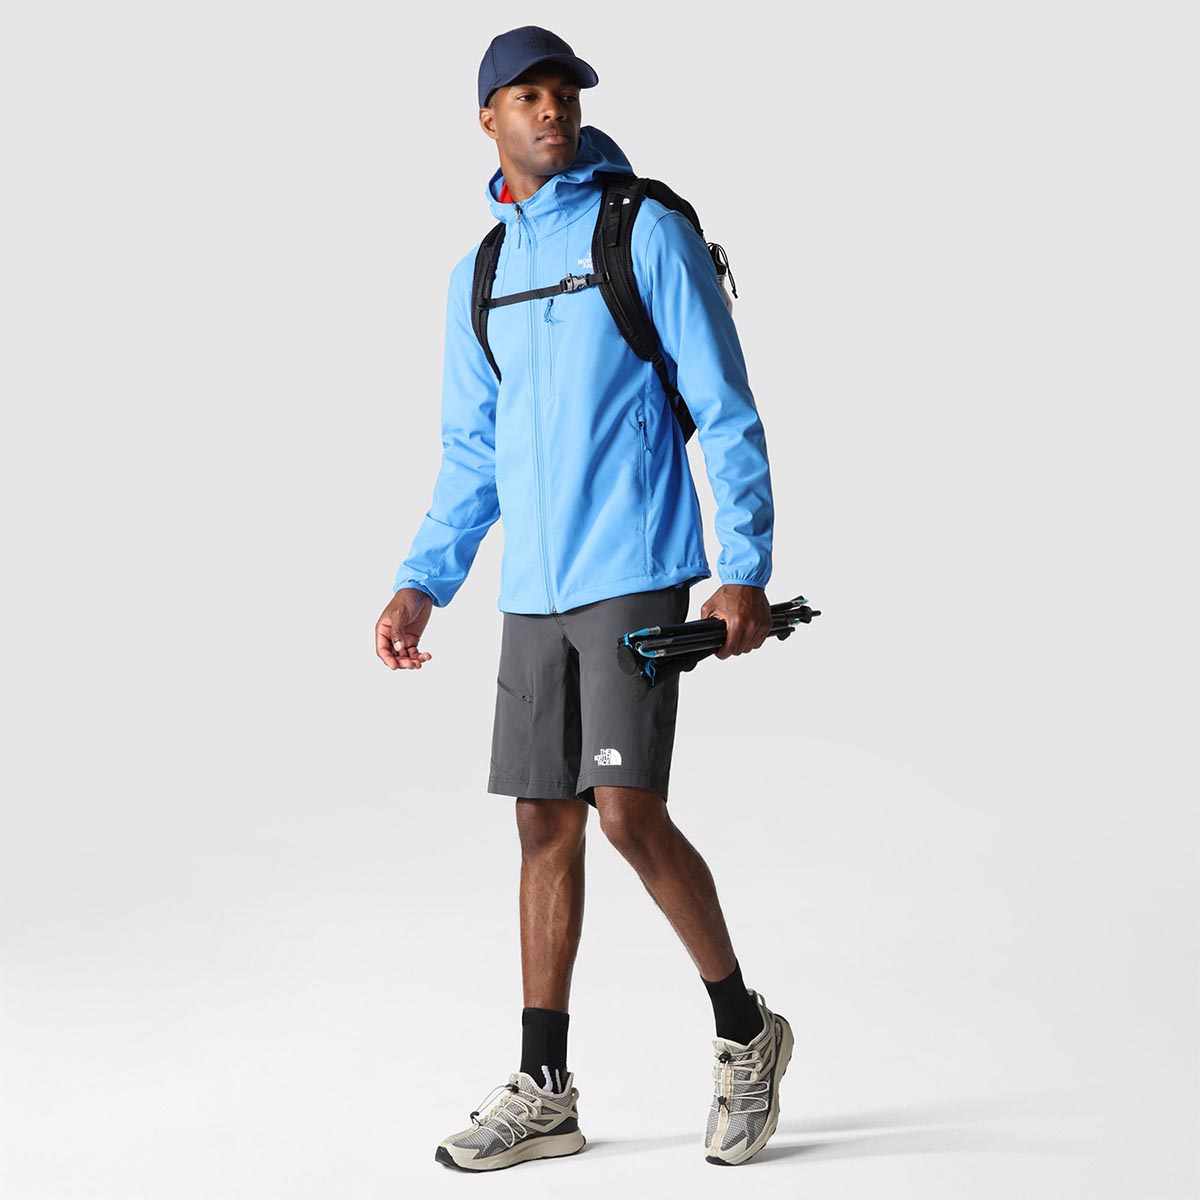 THE NORTH FACE - SPEEDLIGHT SLIM TAPERED SHORTS